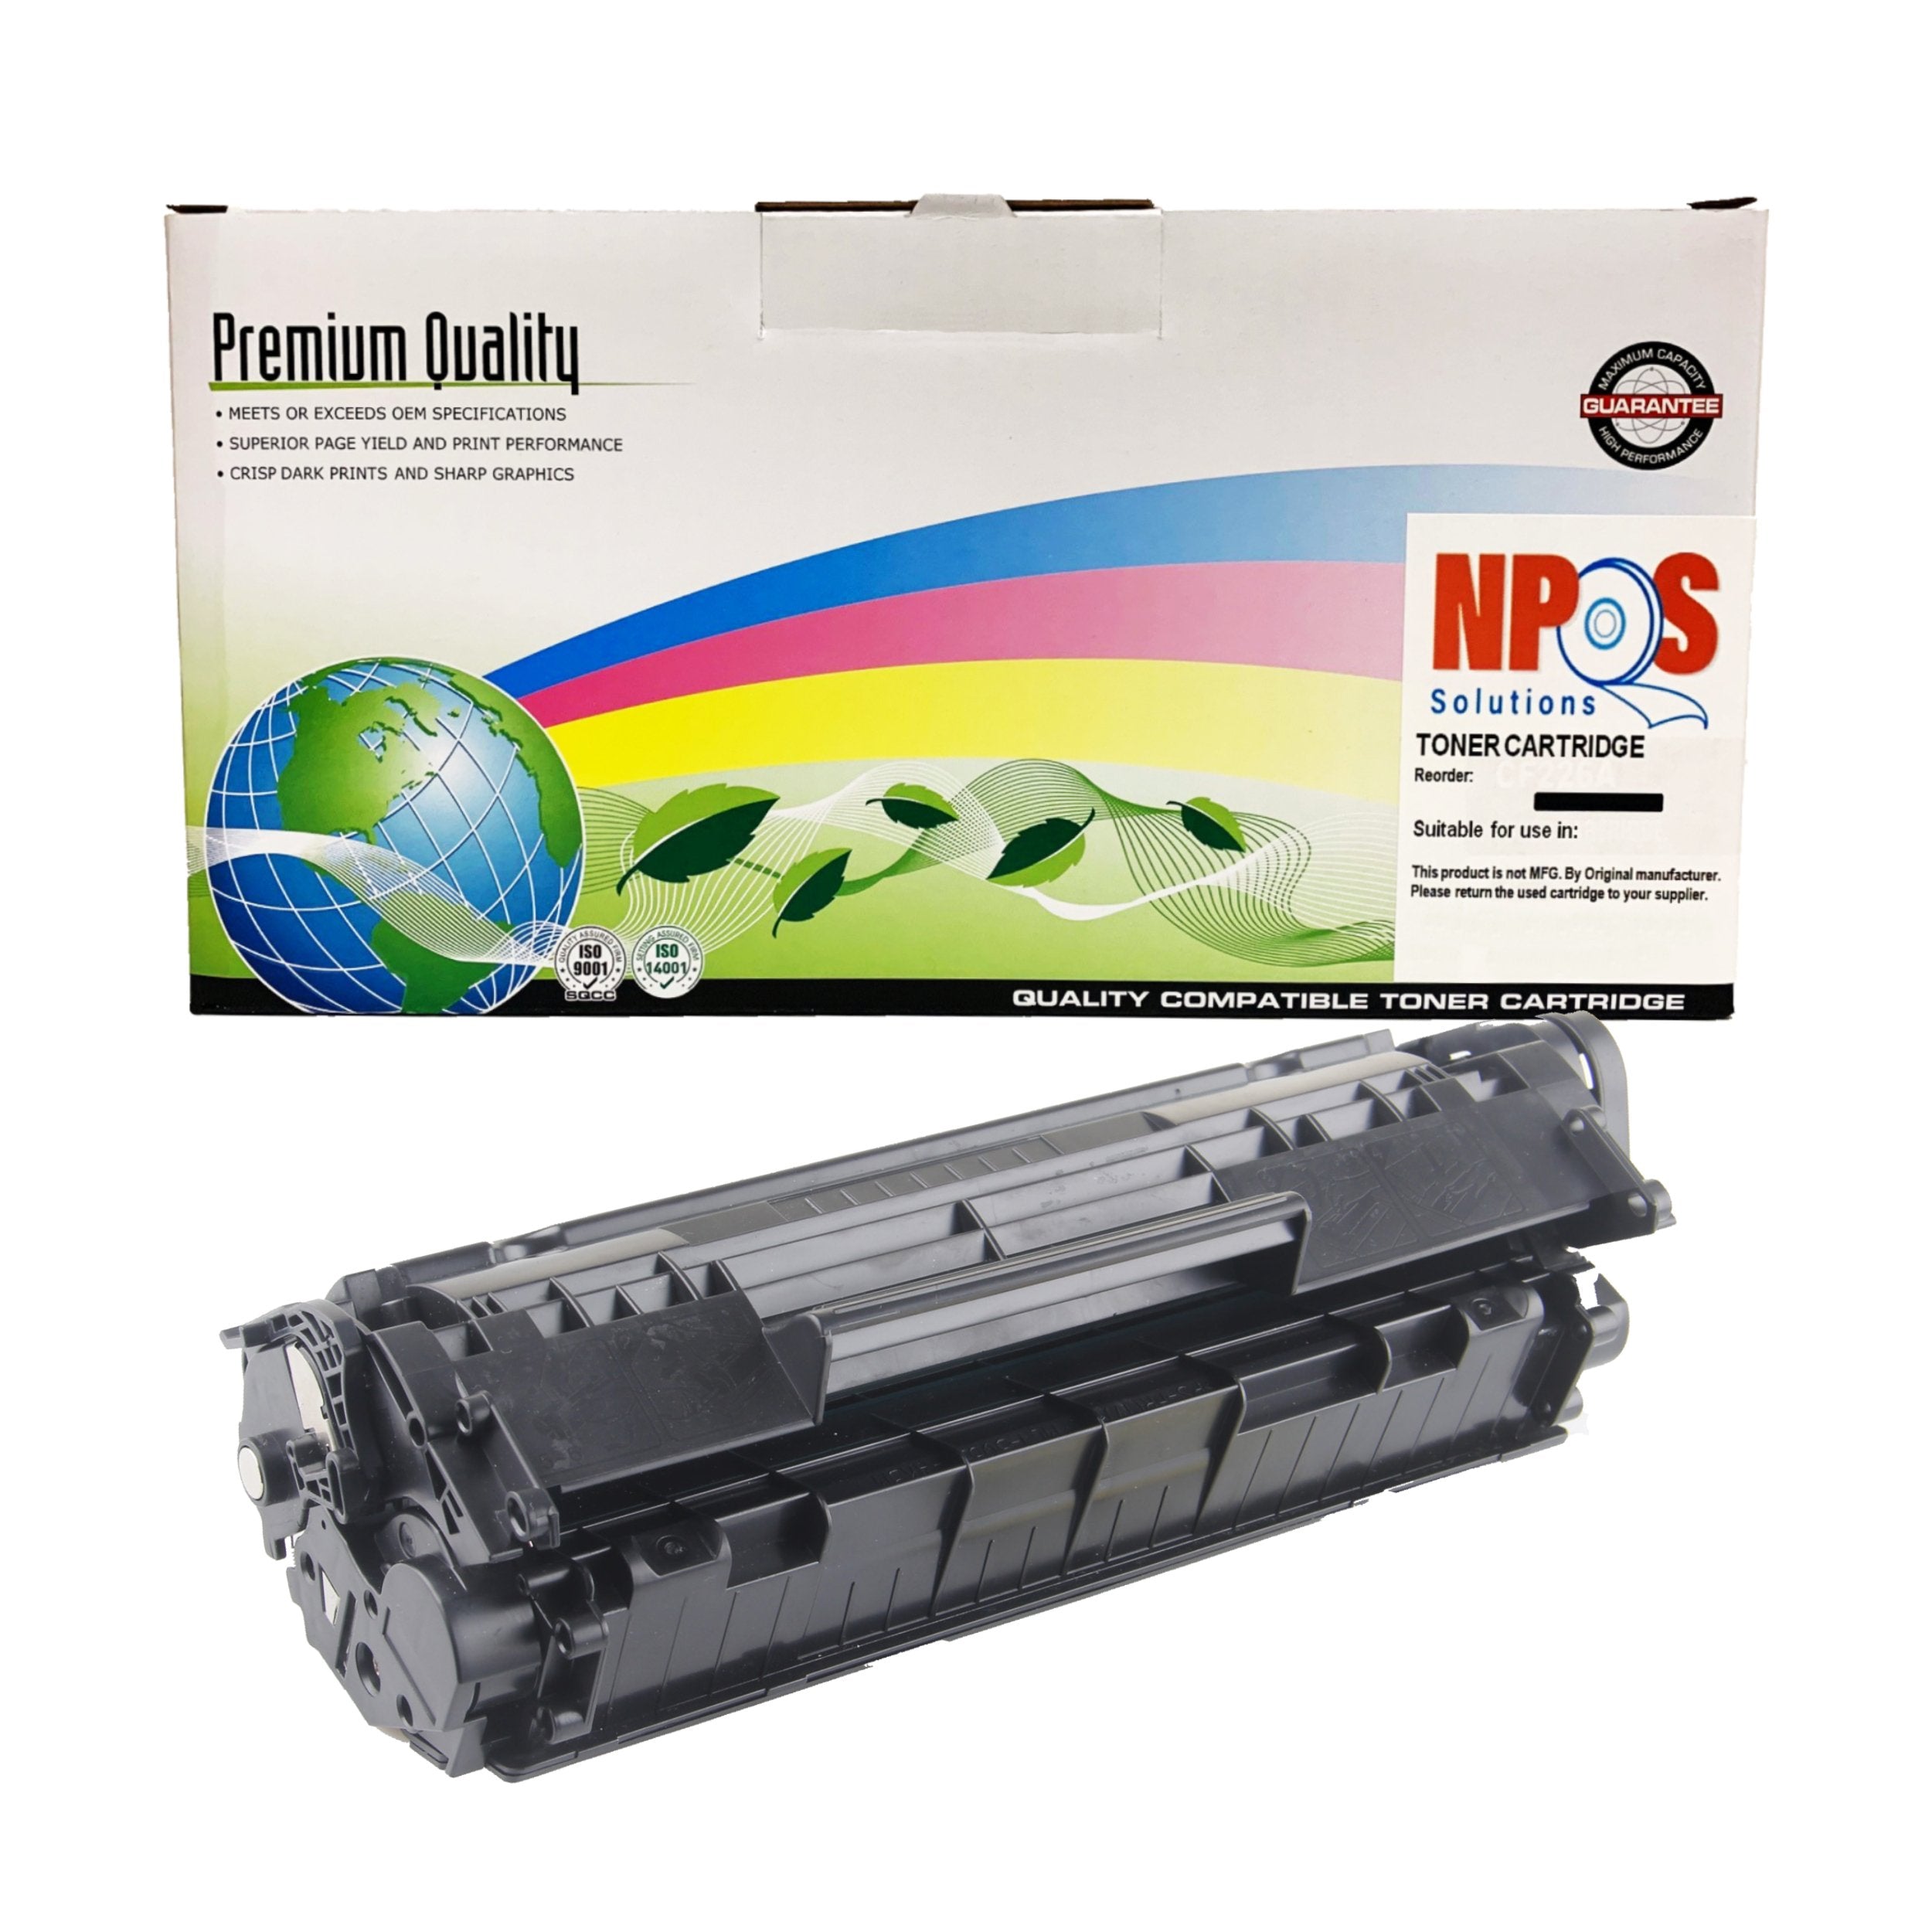 Tentacle eftermiddag Northern Laser Toner Cartridge Compatible with HP Q2612A for Printers LJ 1010/1 –  NPOS Solutions